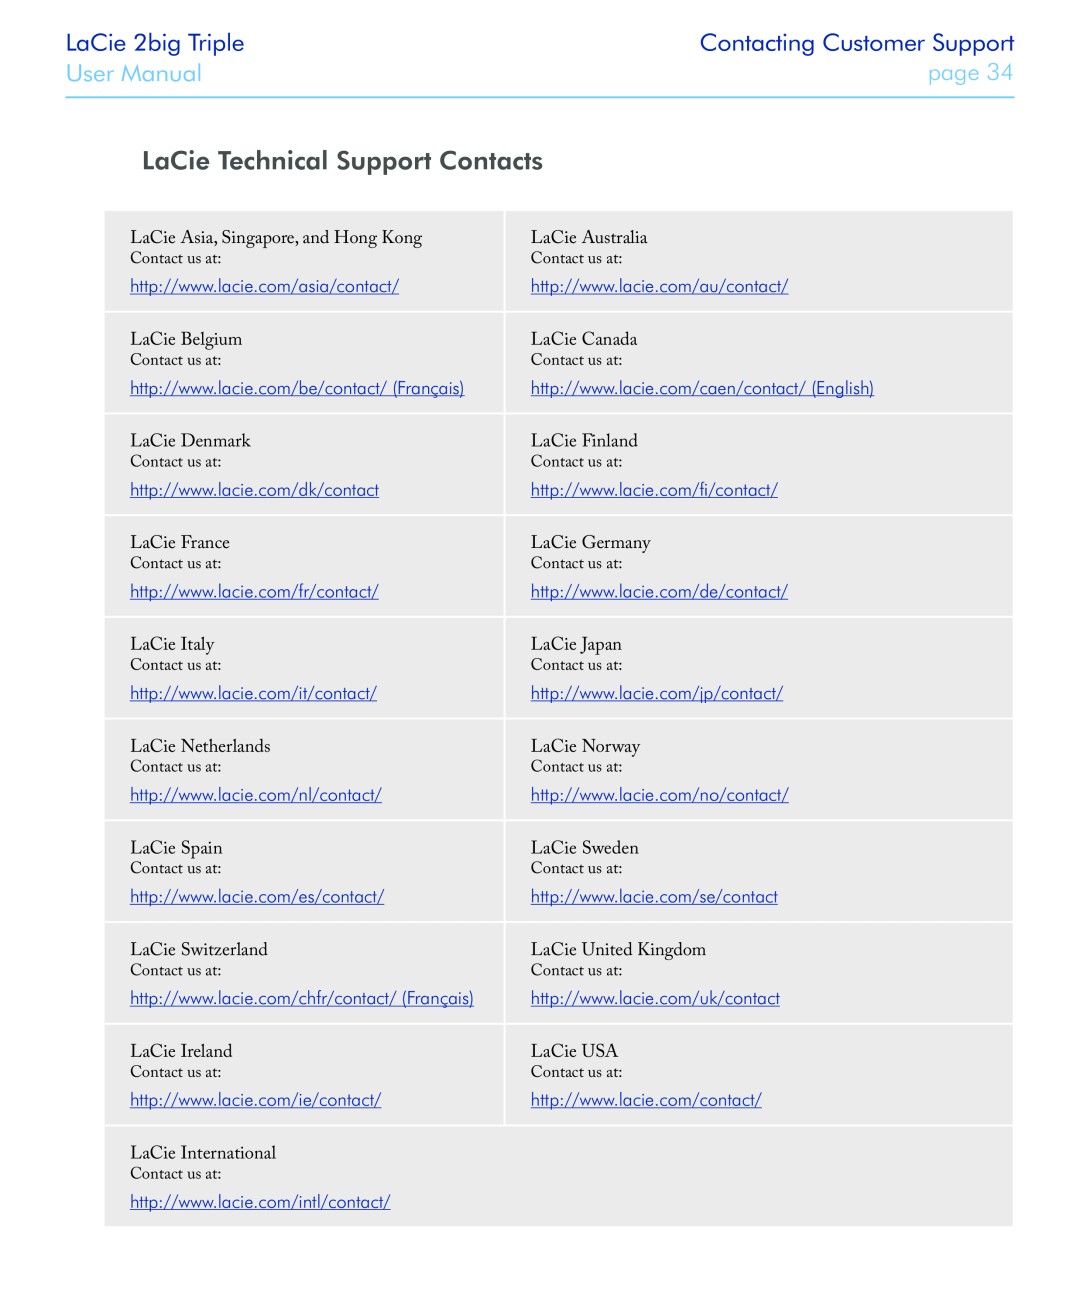 LaCie 2big triple LaCie Technical Support Contacts, LaCie 2big Triple, Contacting Customer Support, User Manual, page 